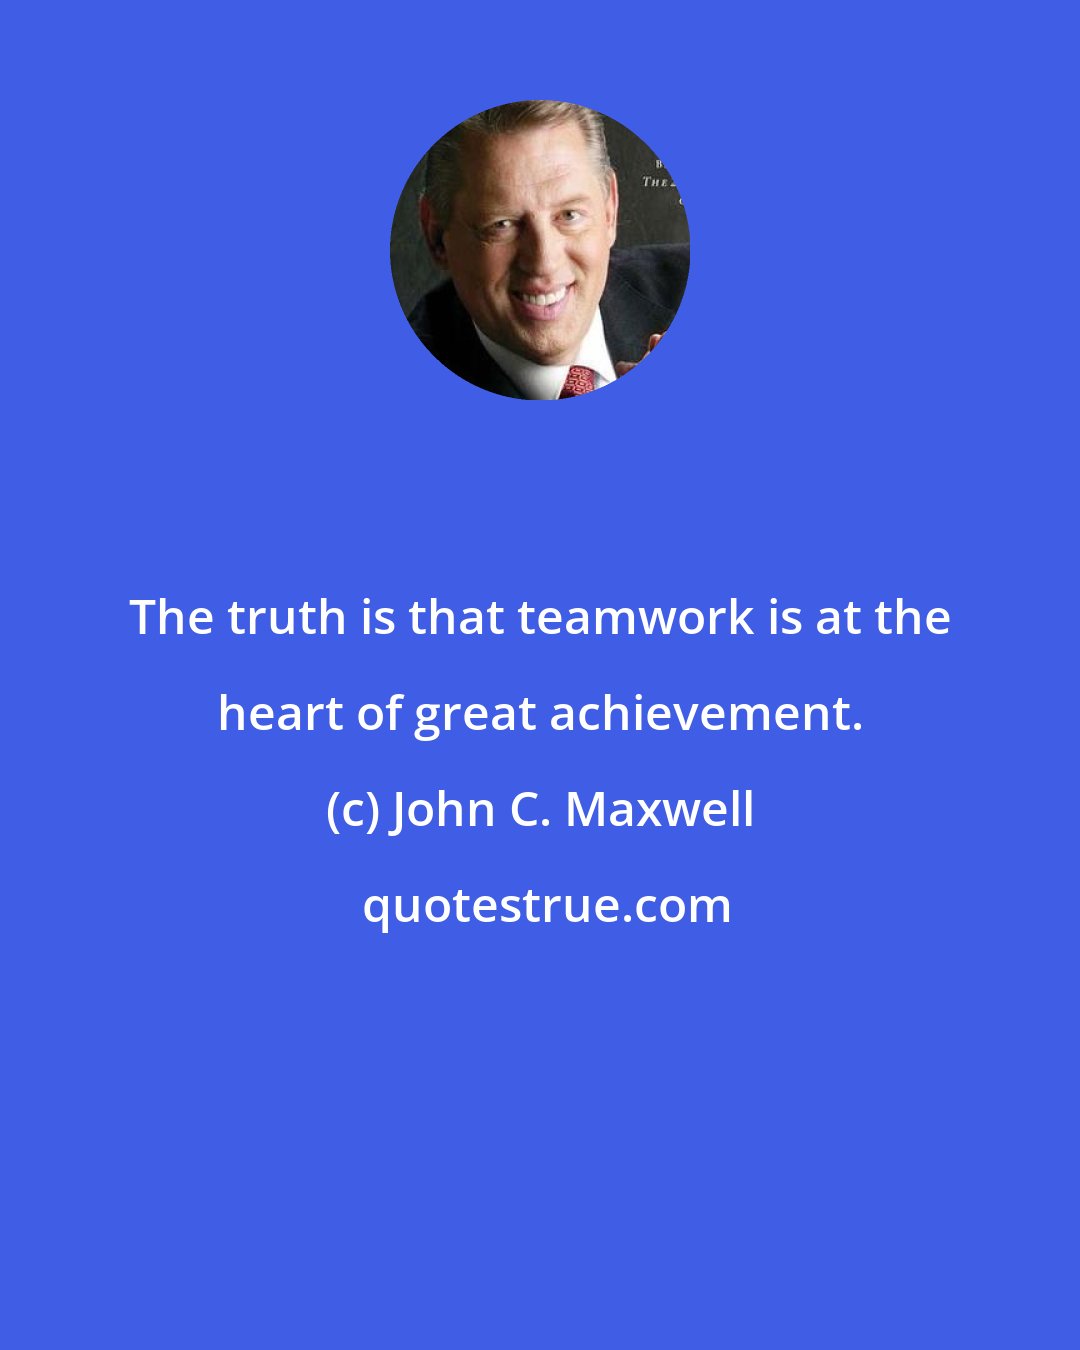 John C. Maxwell: The truth is that teamwork is at the heart of great achievement.